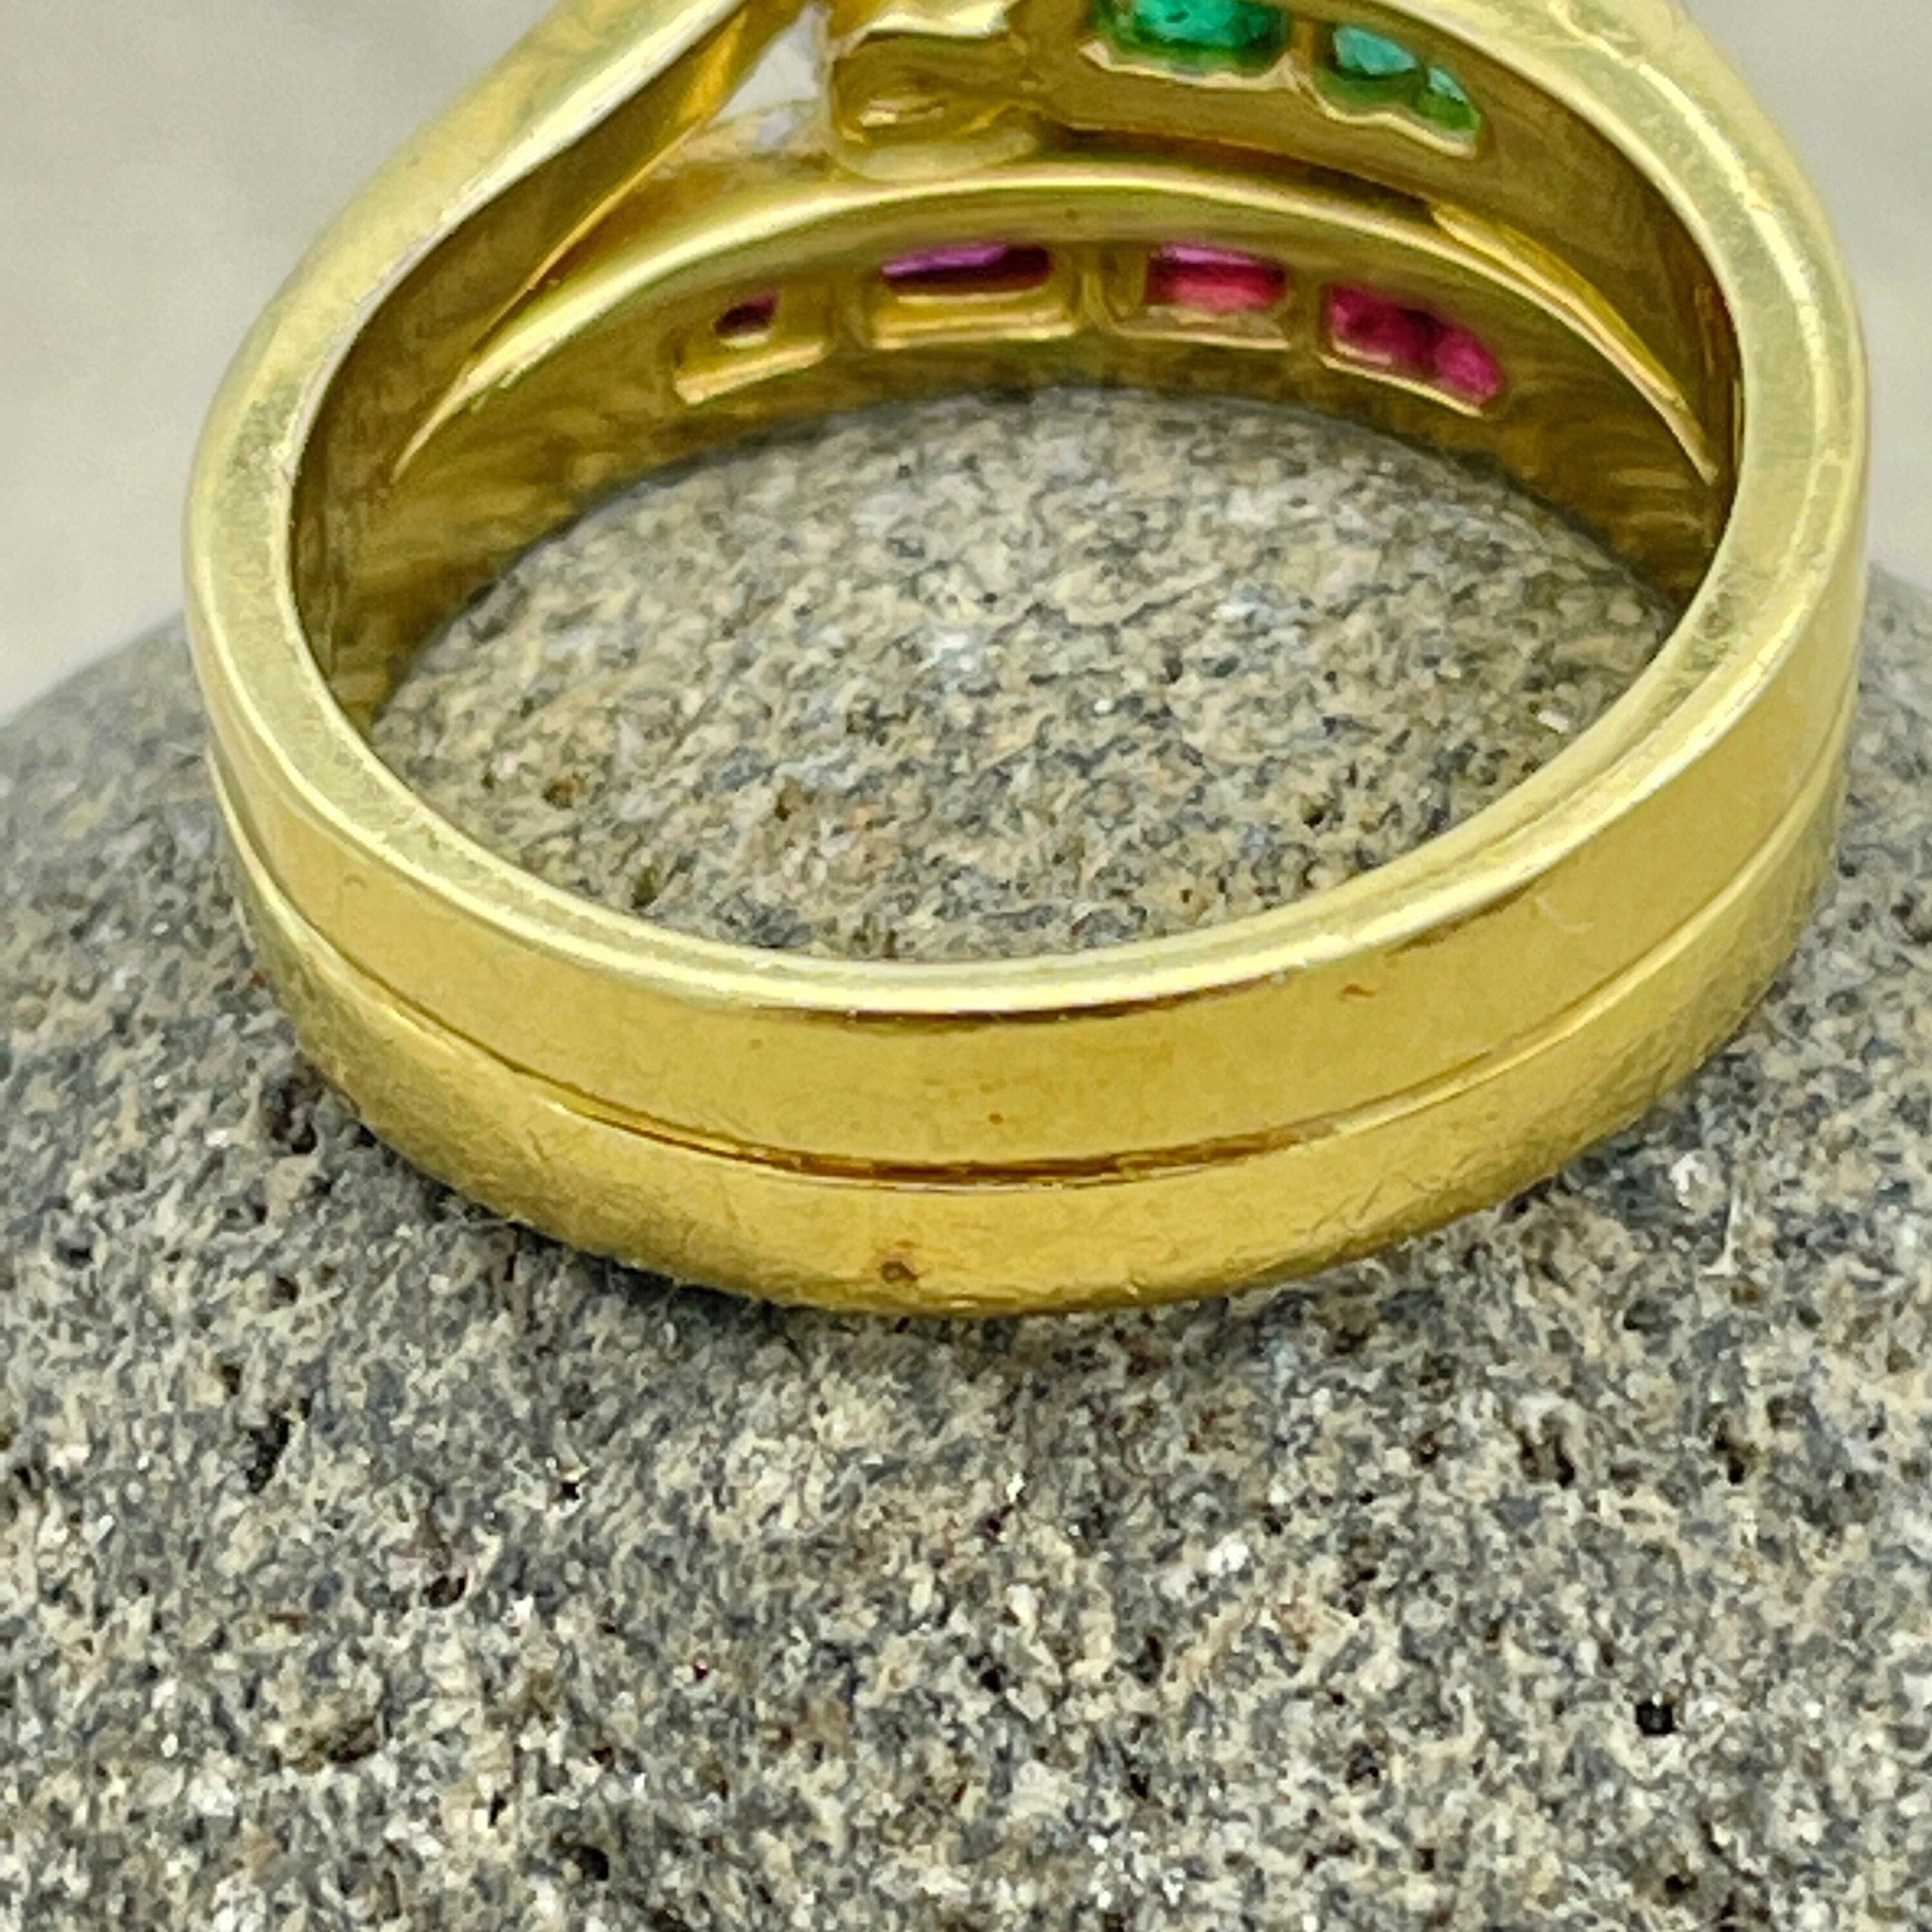 Vintage diamond, emerald and ruby 18ct gold ring, modernist style c1950s/60s